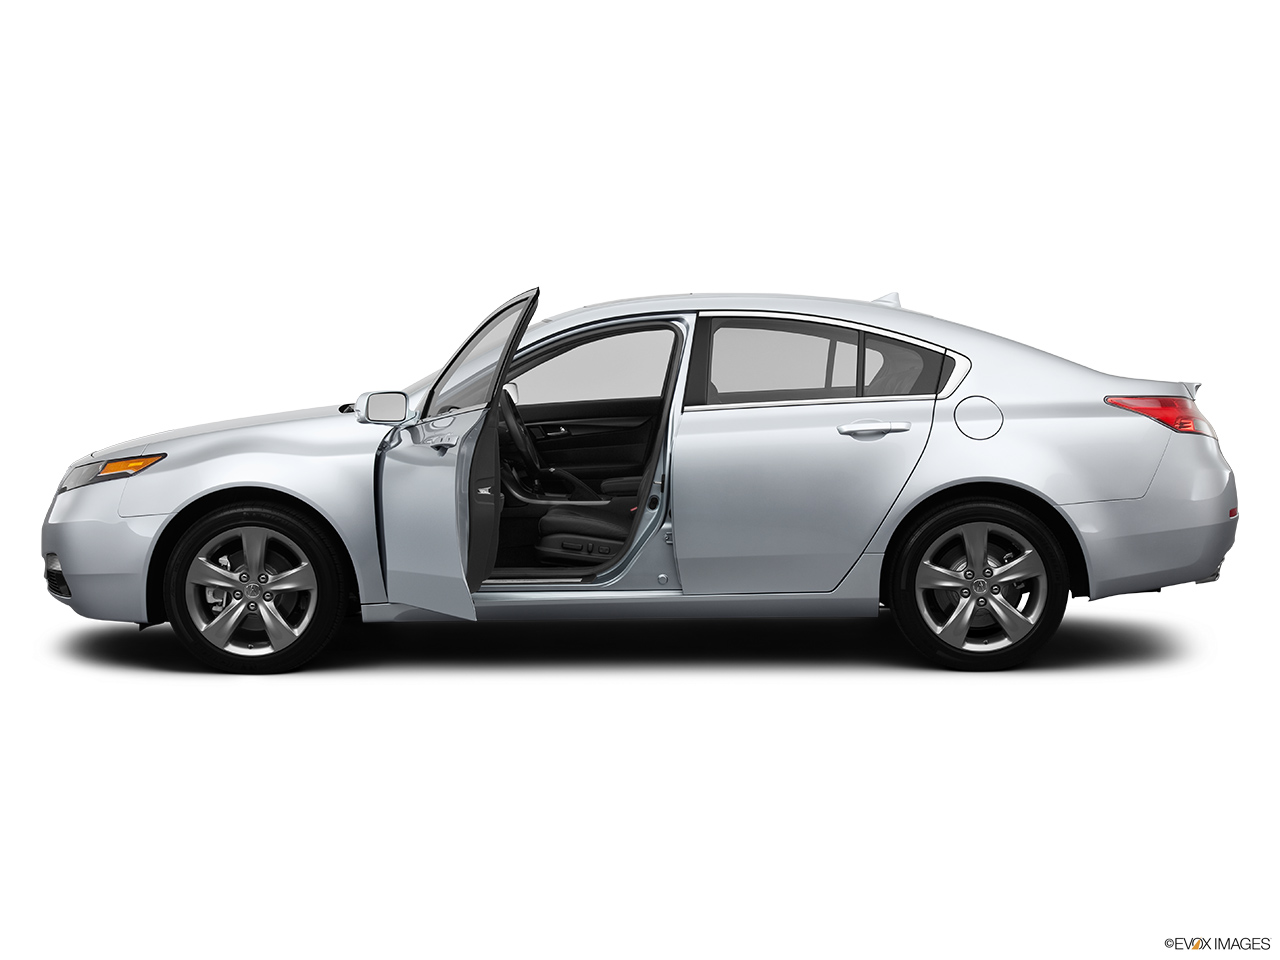 2013 Acura TL SH-AWD Driver's side profile with drivers side door open. 